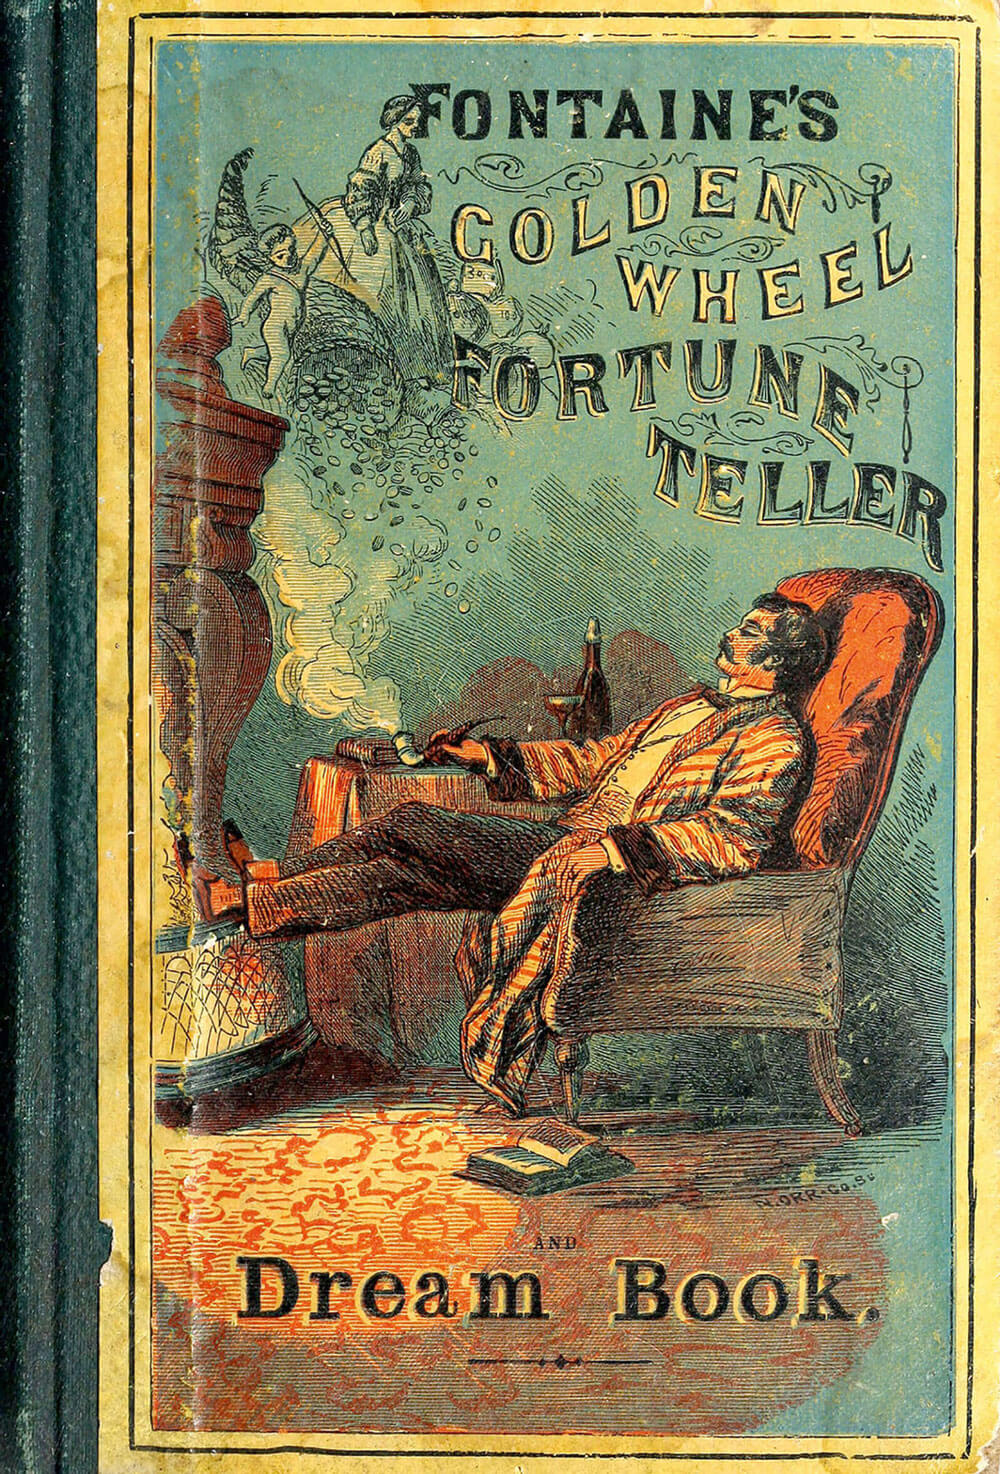 Felix Fontaine, The Golden Wheel Fortune Teller and Dream Book (New York: Dick & Fitzgerald, 1862).